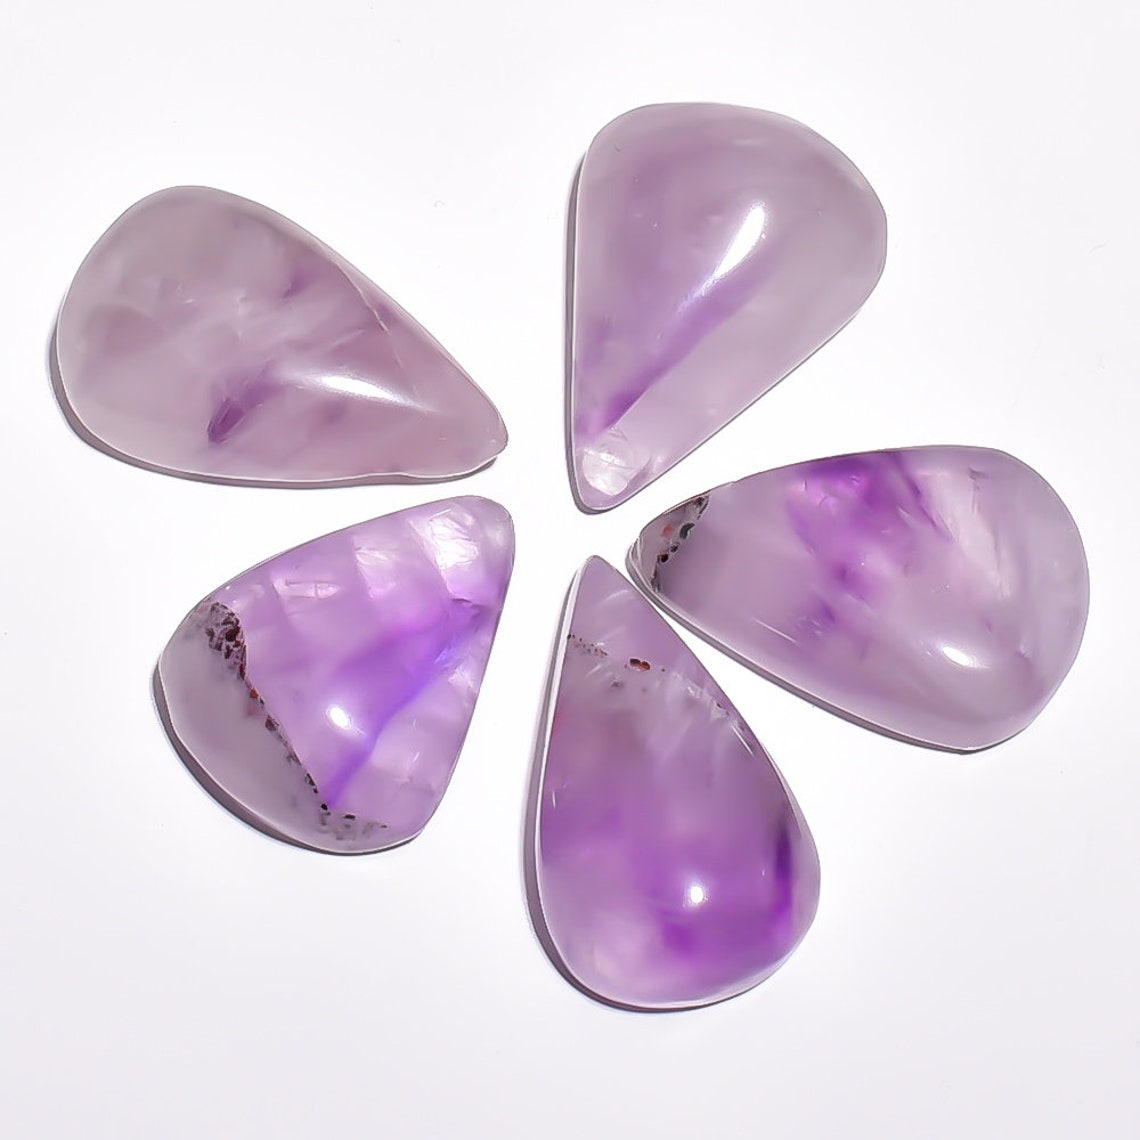 4 Pieces Chevron Amethyst Cabochons Lot 16x21mm to 17x24mm - Etsy